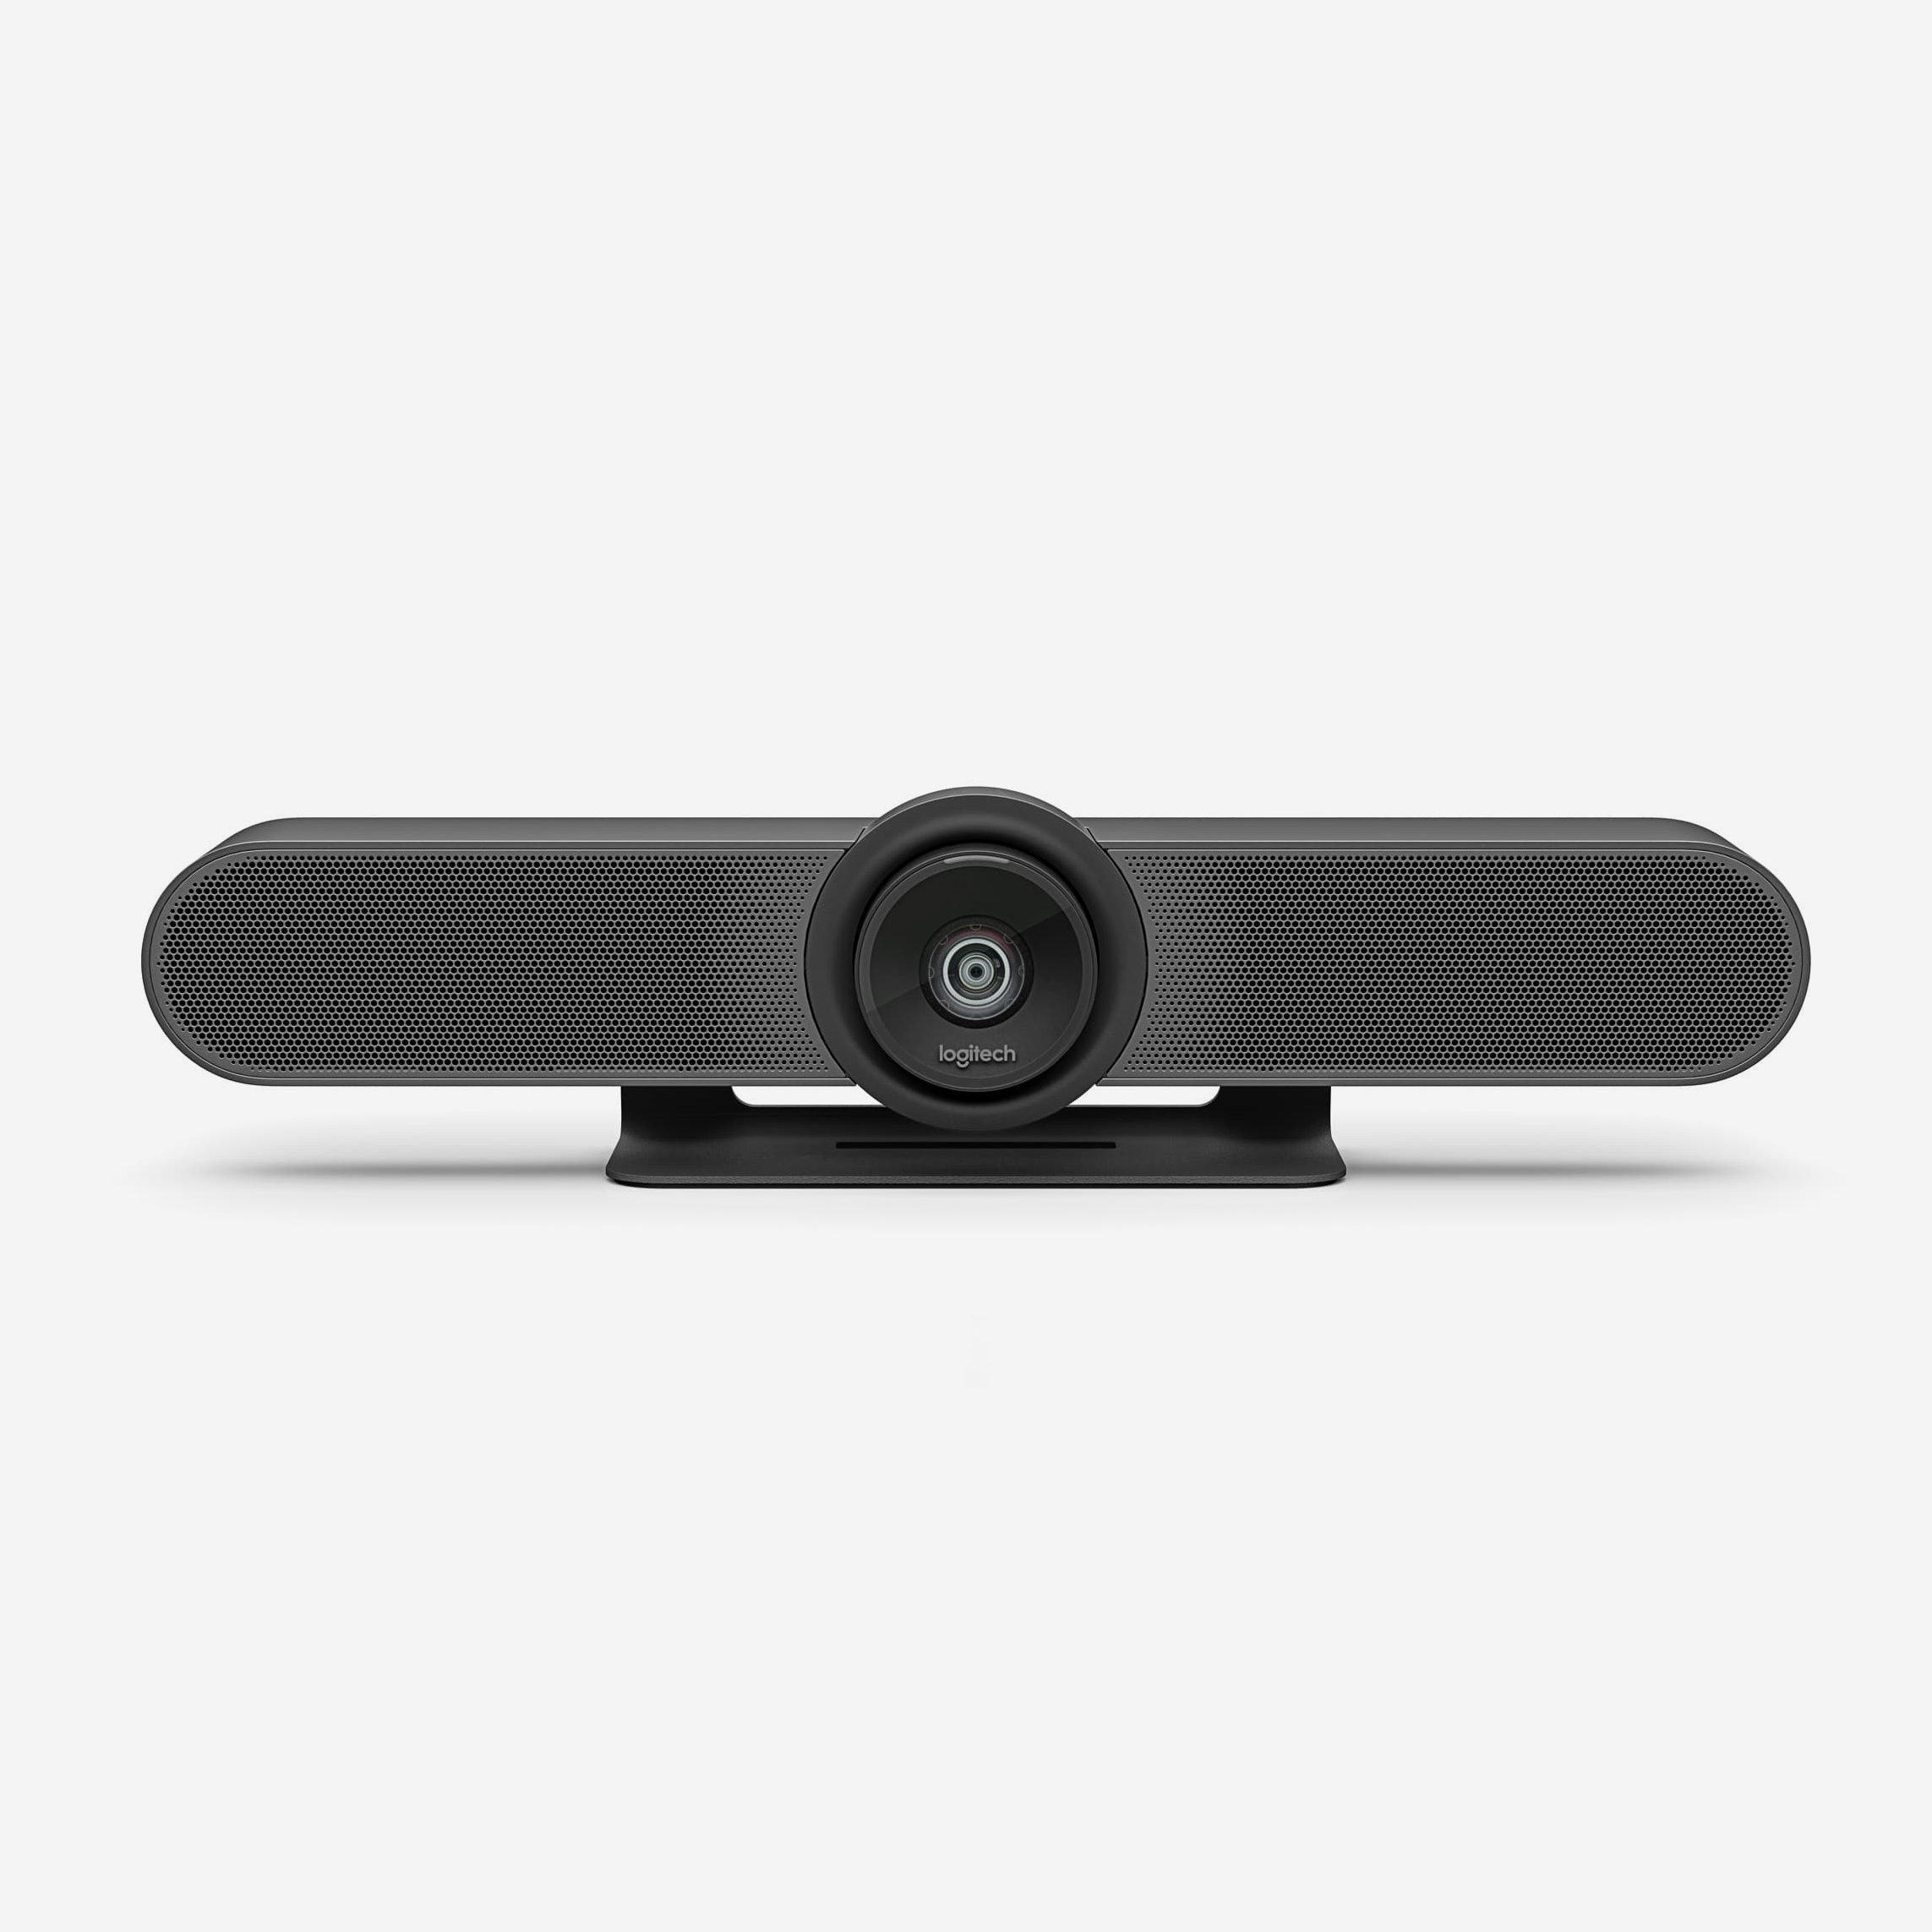 Logitech's C920 Pro is the best webcam and now it's 50% off for